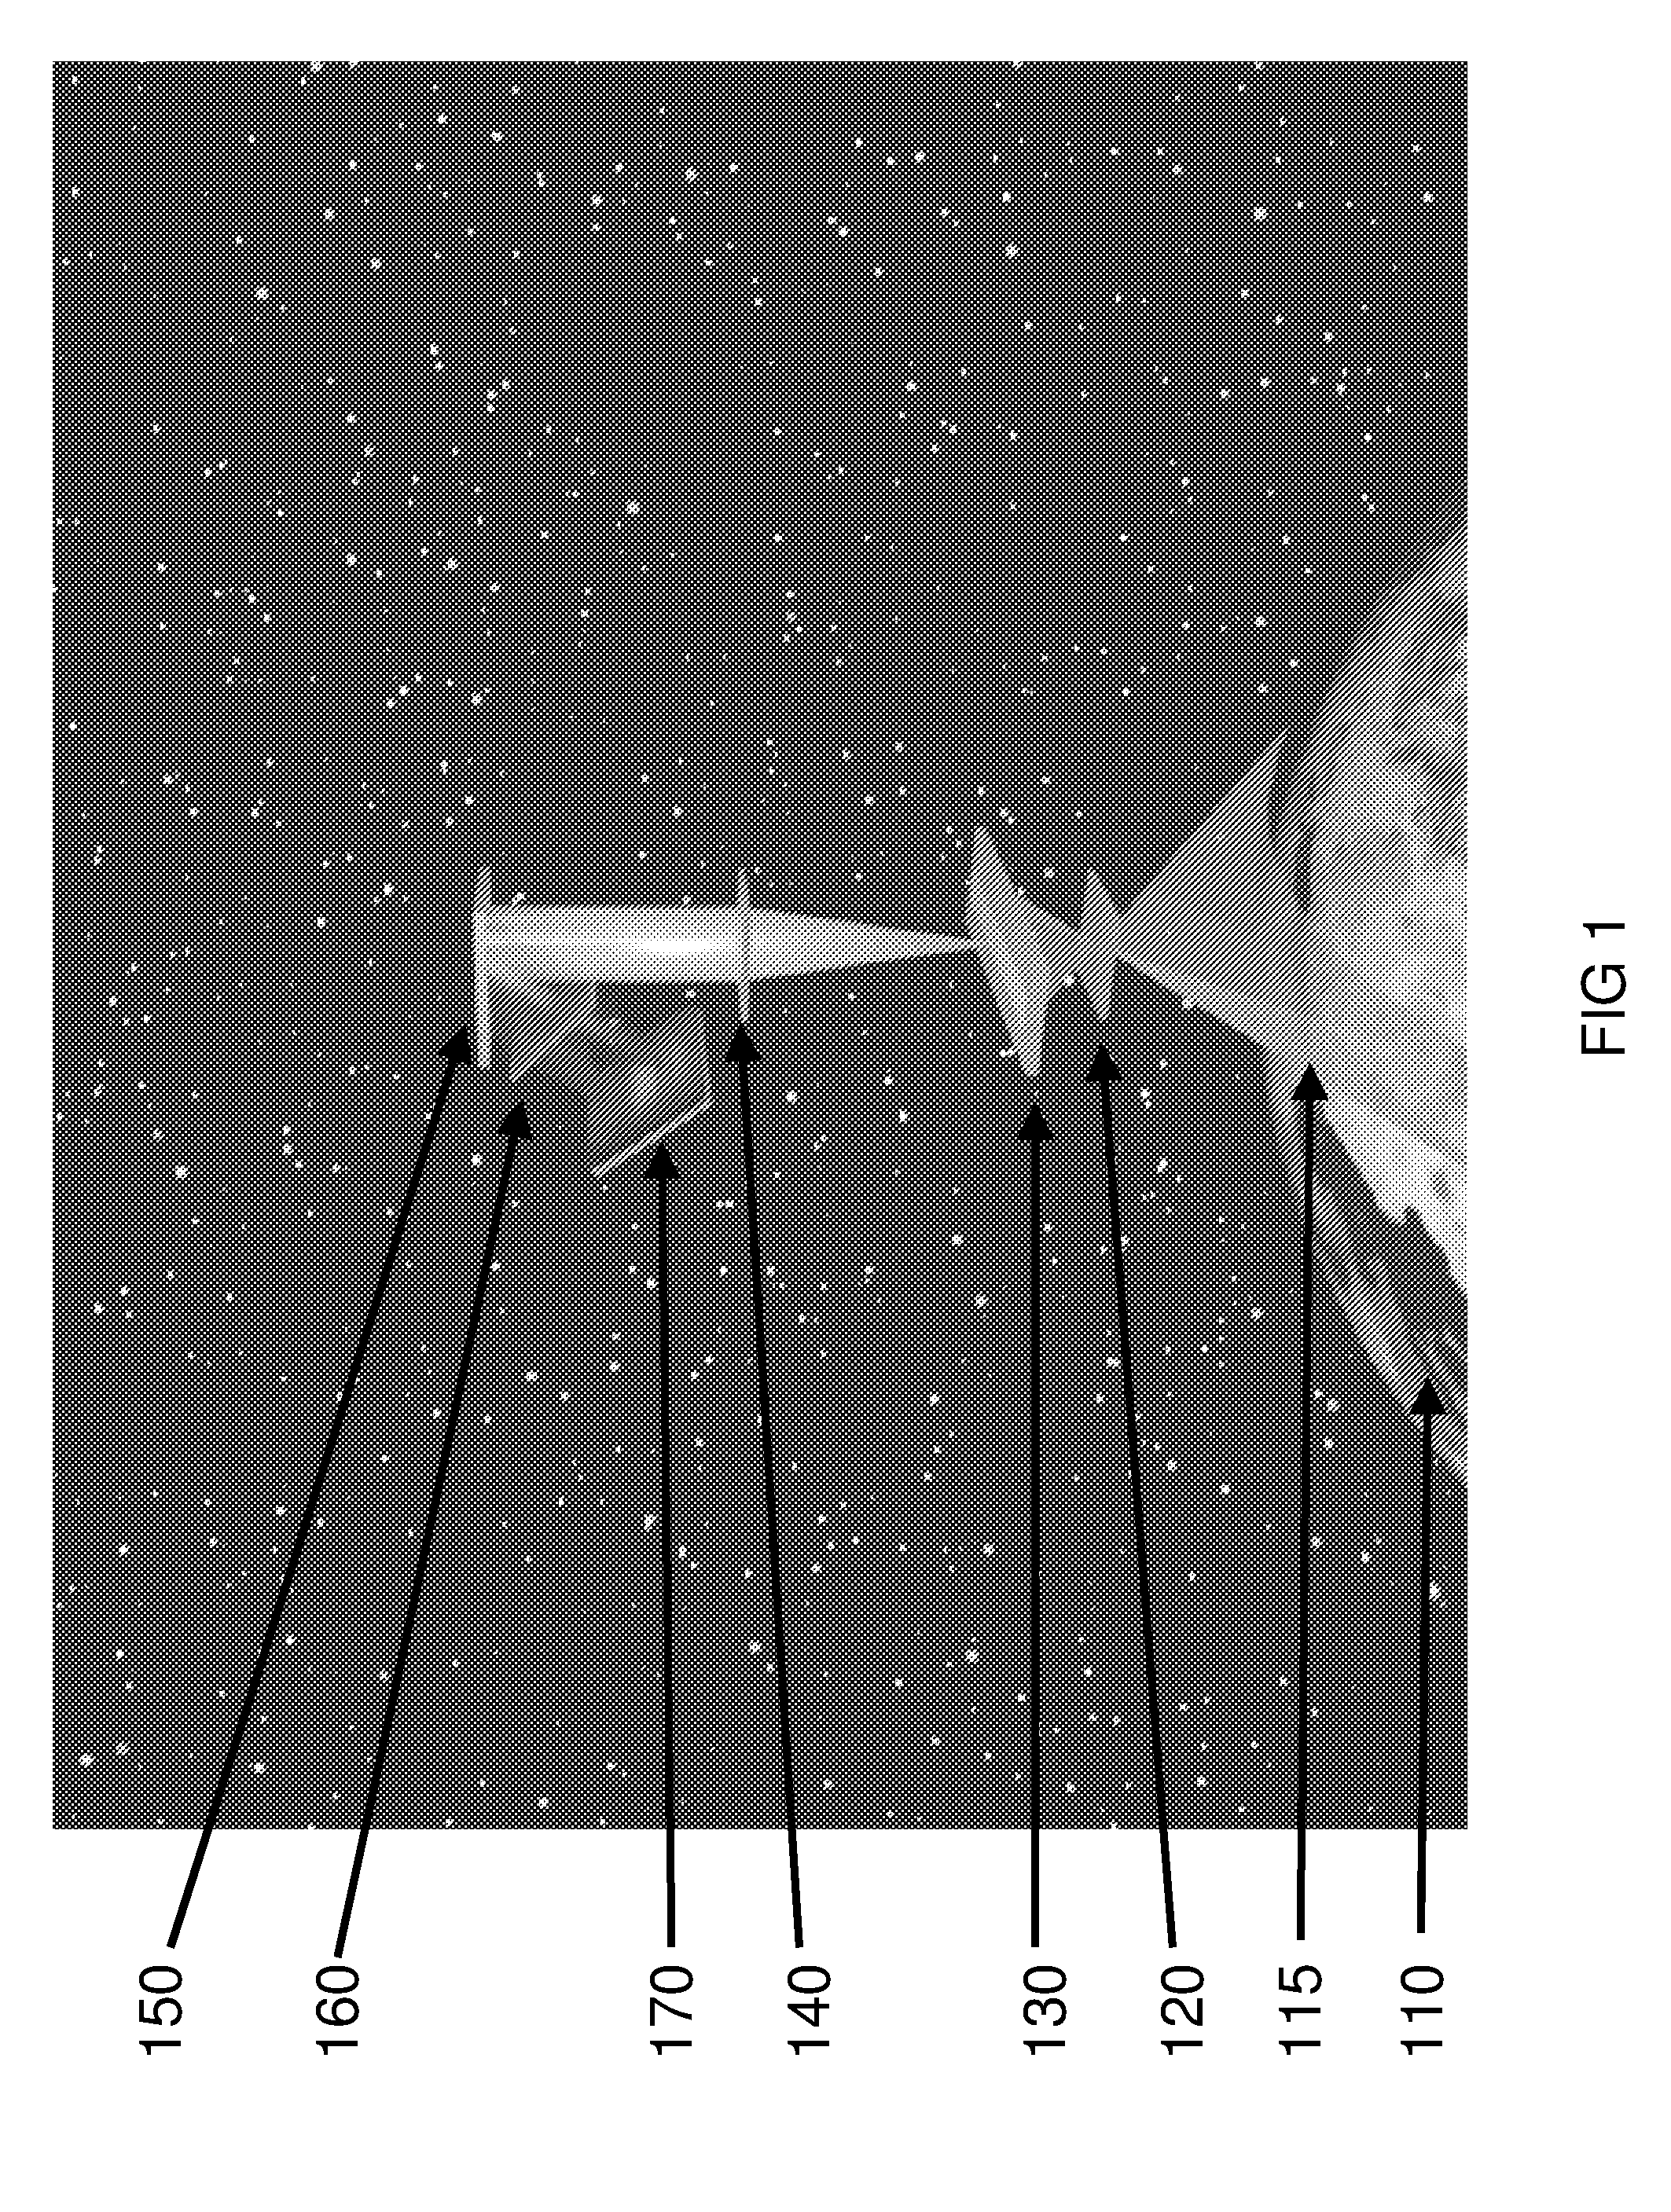 Method for producing a diffraction grating